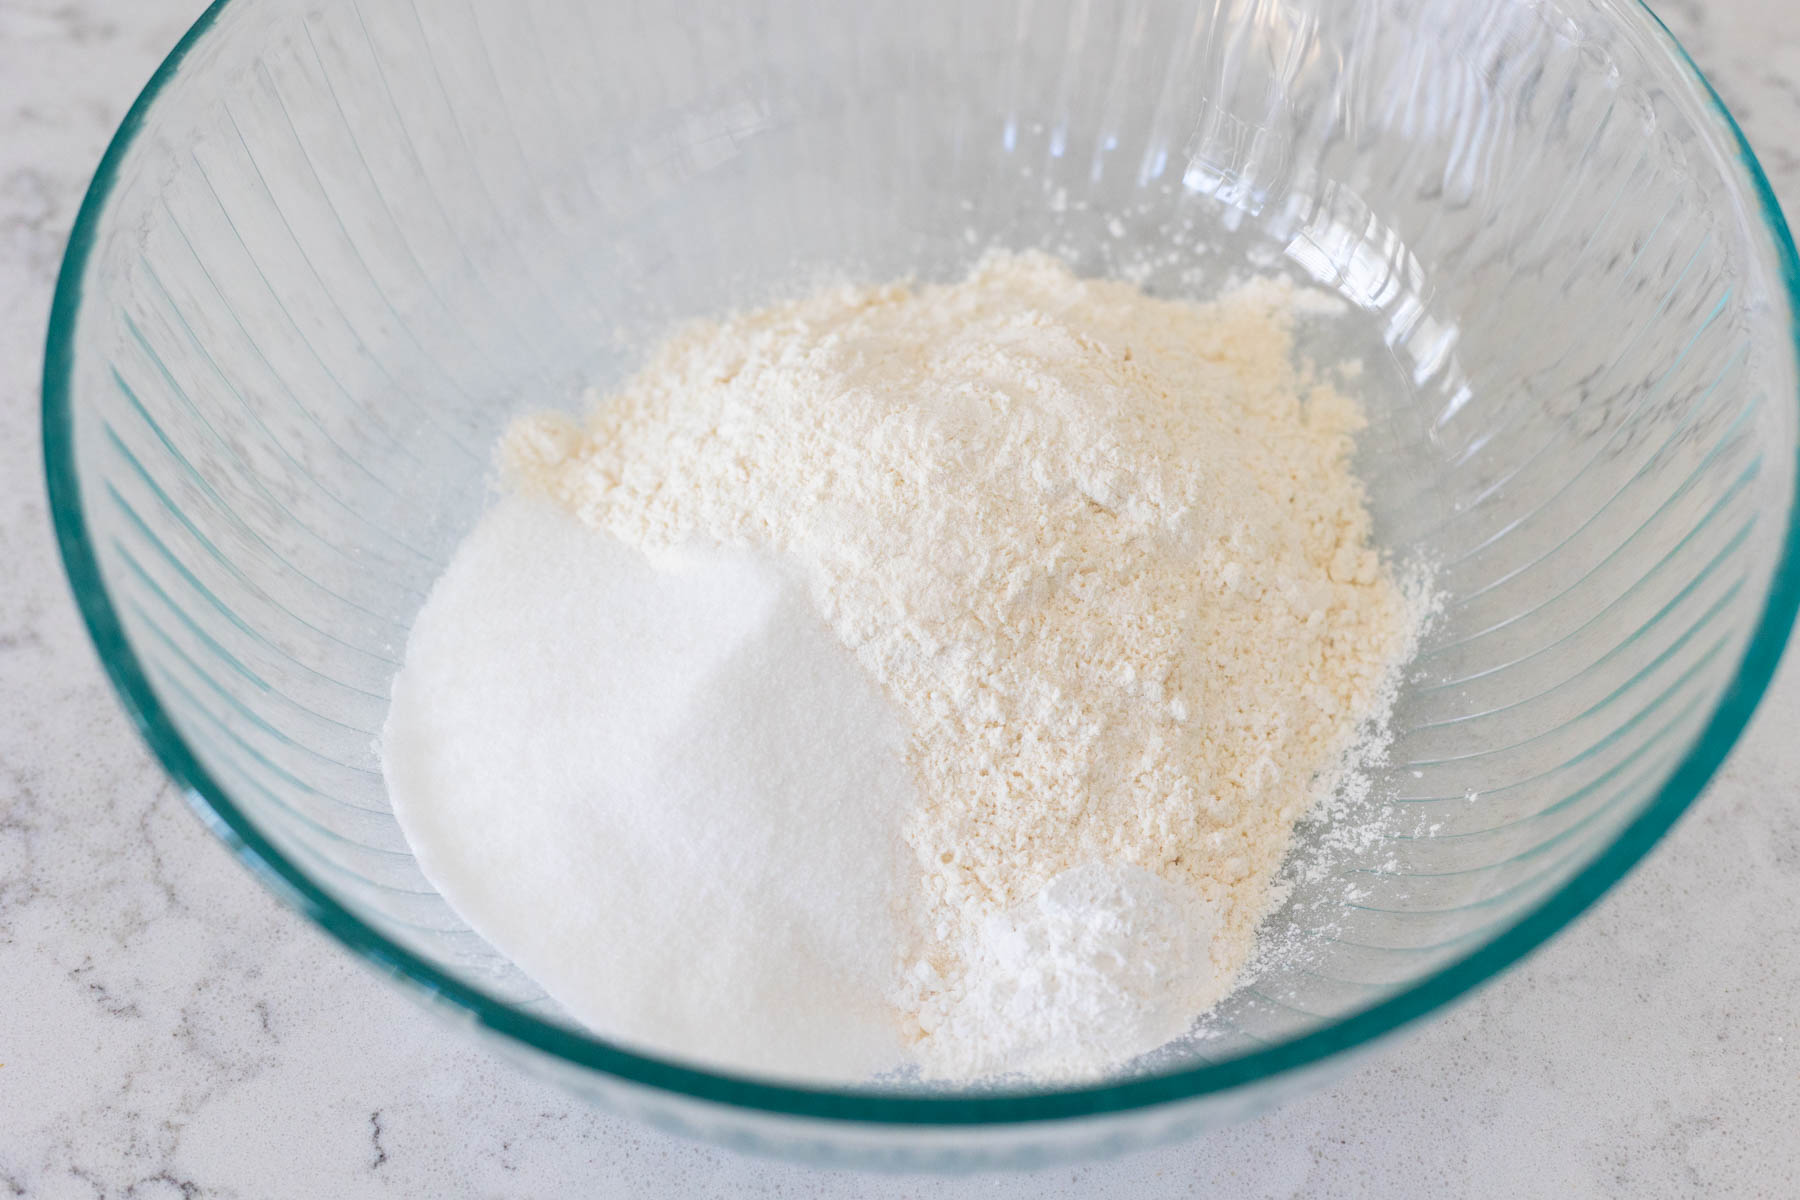 The flour, sugar, and baking powder are in a large mixing bowl.